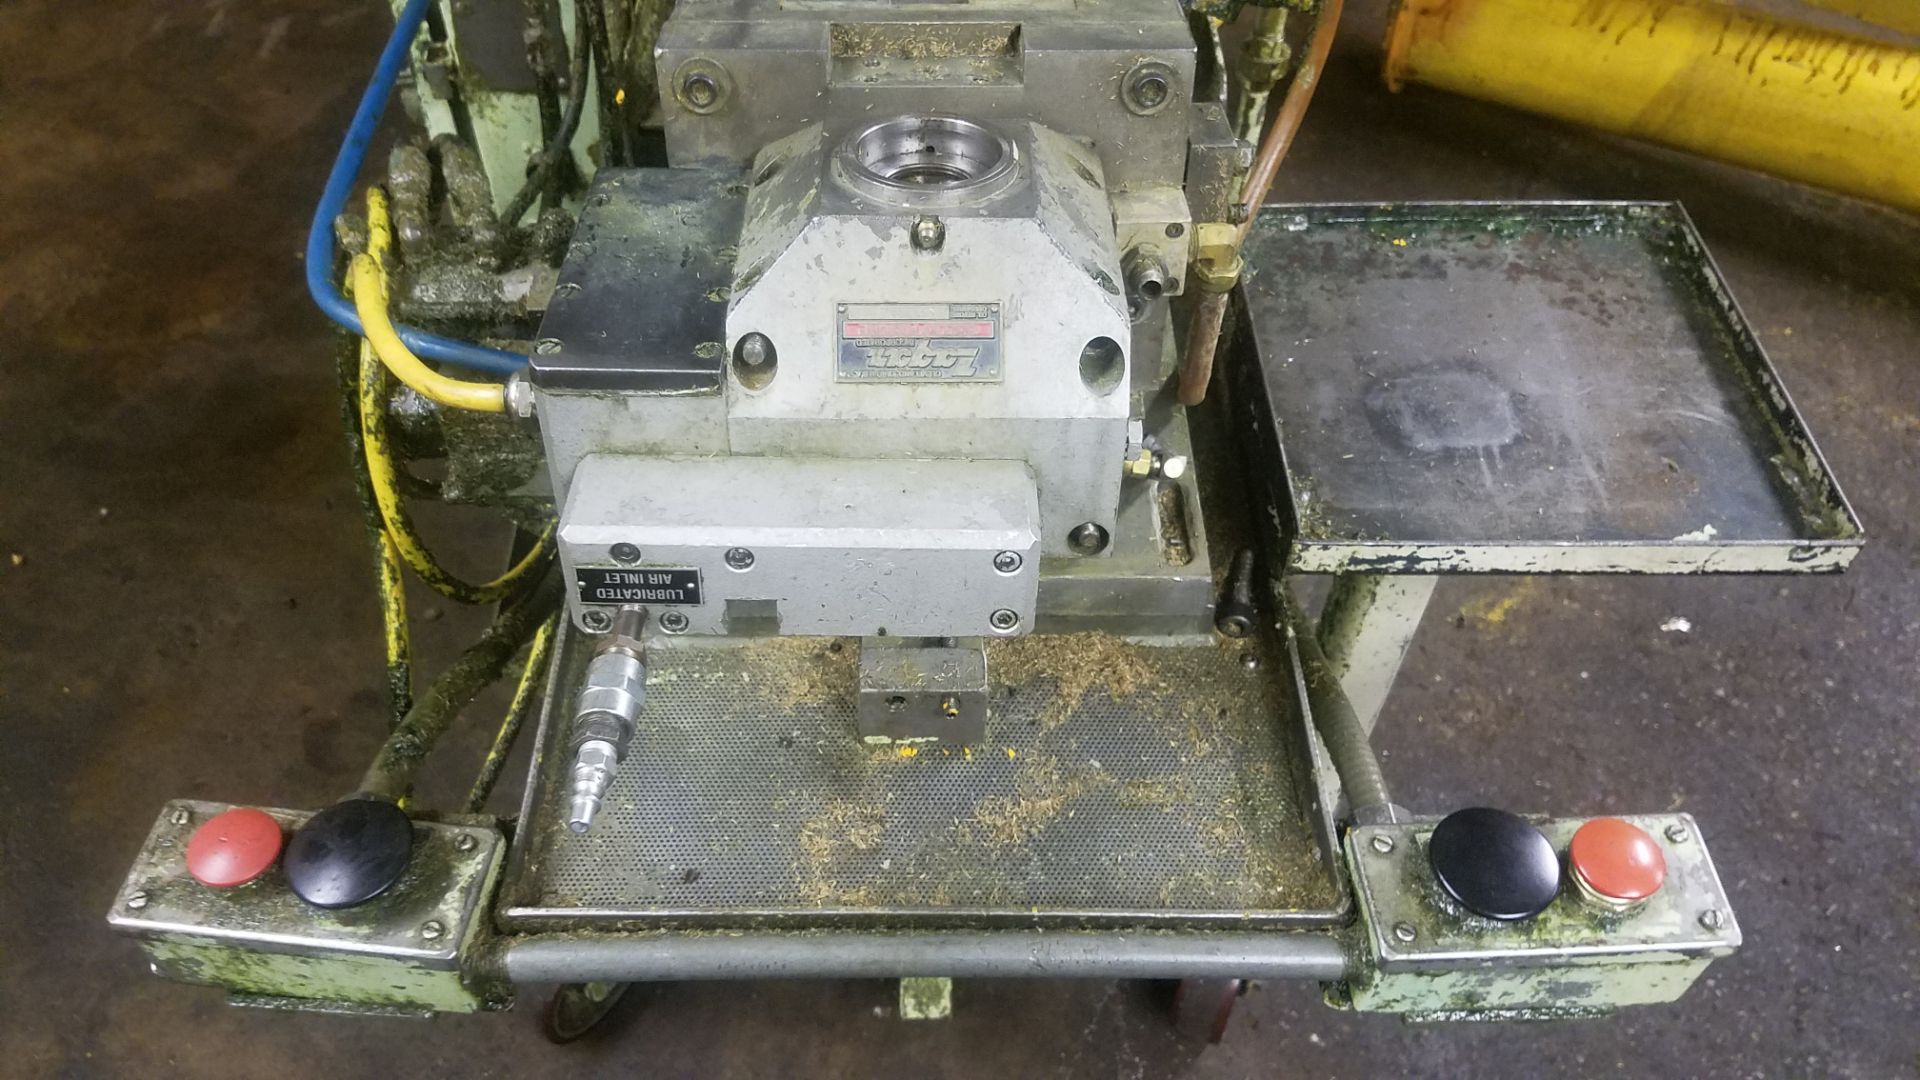 Miles Broach Model MBLD-2-18-150 s/n Unknown, Allen Bradley Controls, No Coolant Pump, Loading - Image 2 of 4